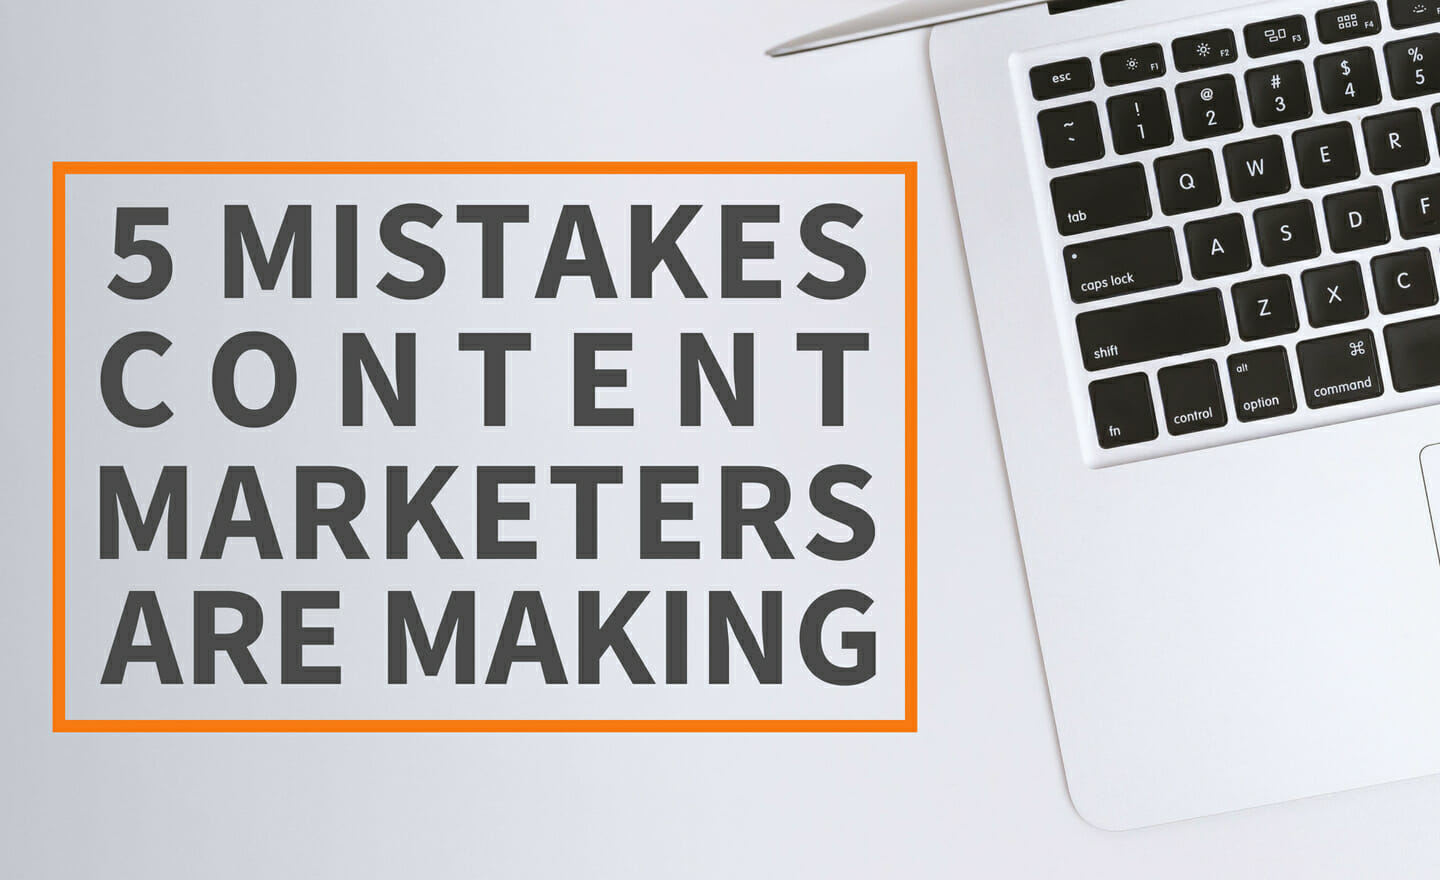 5 mistakes content marketers are making